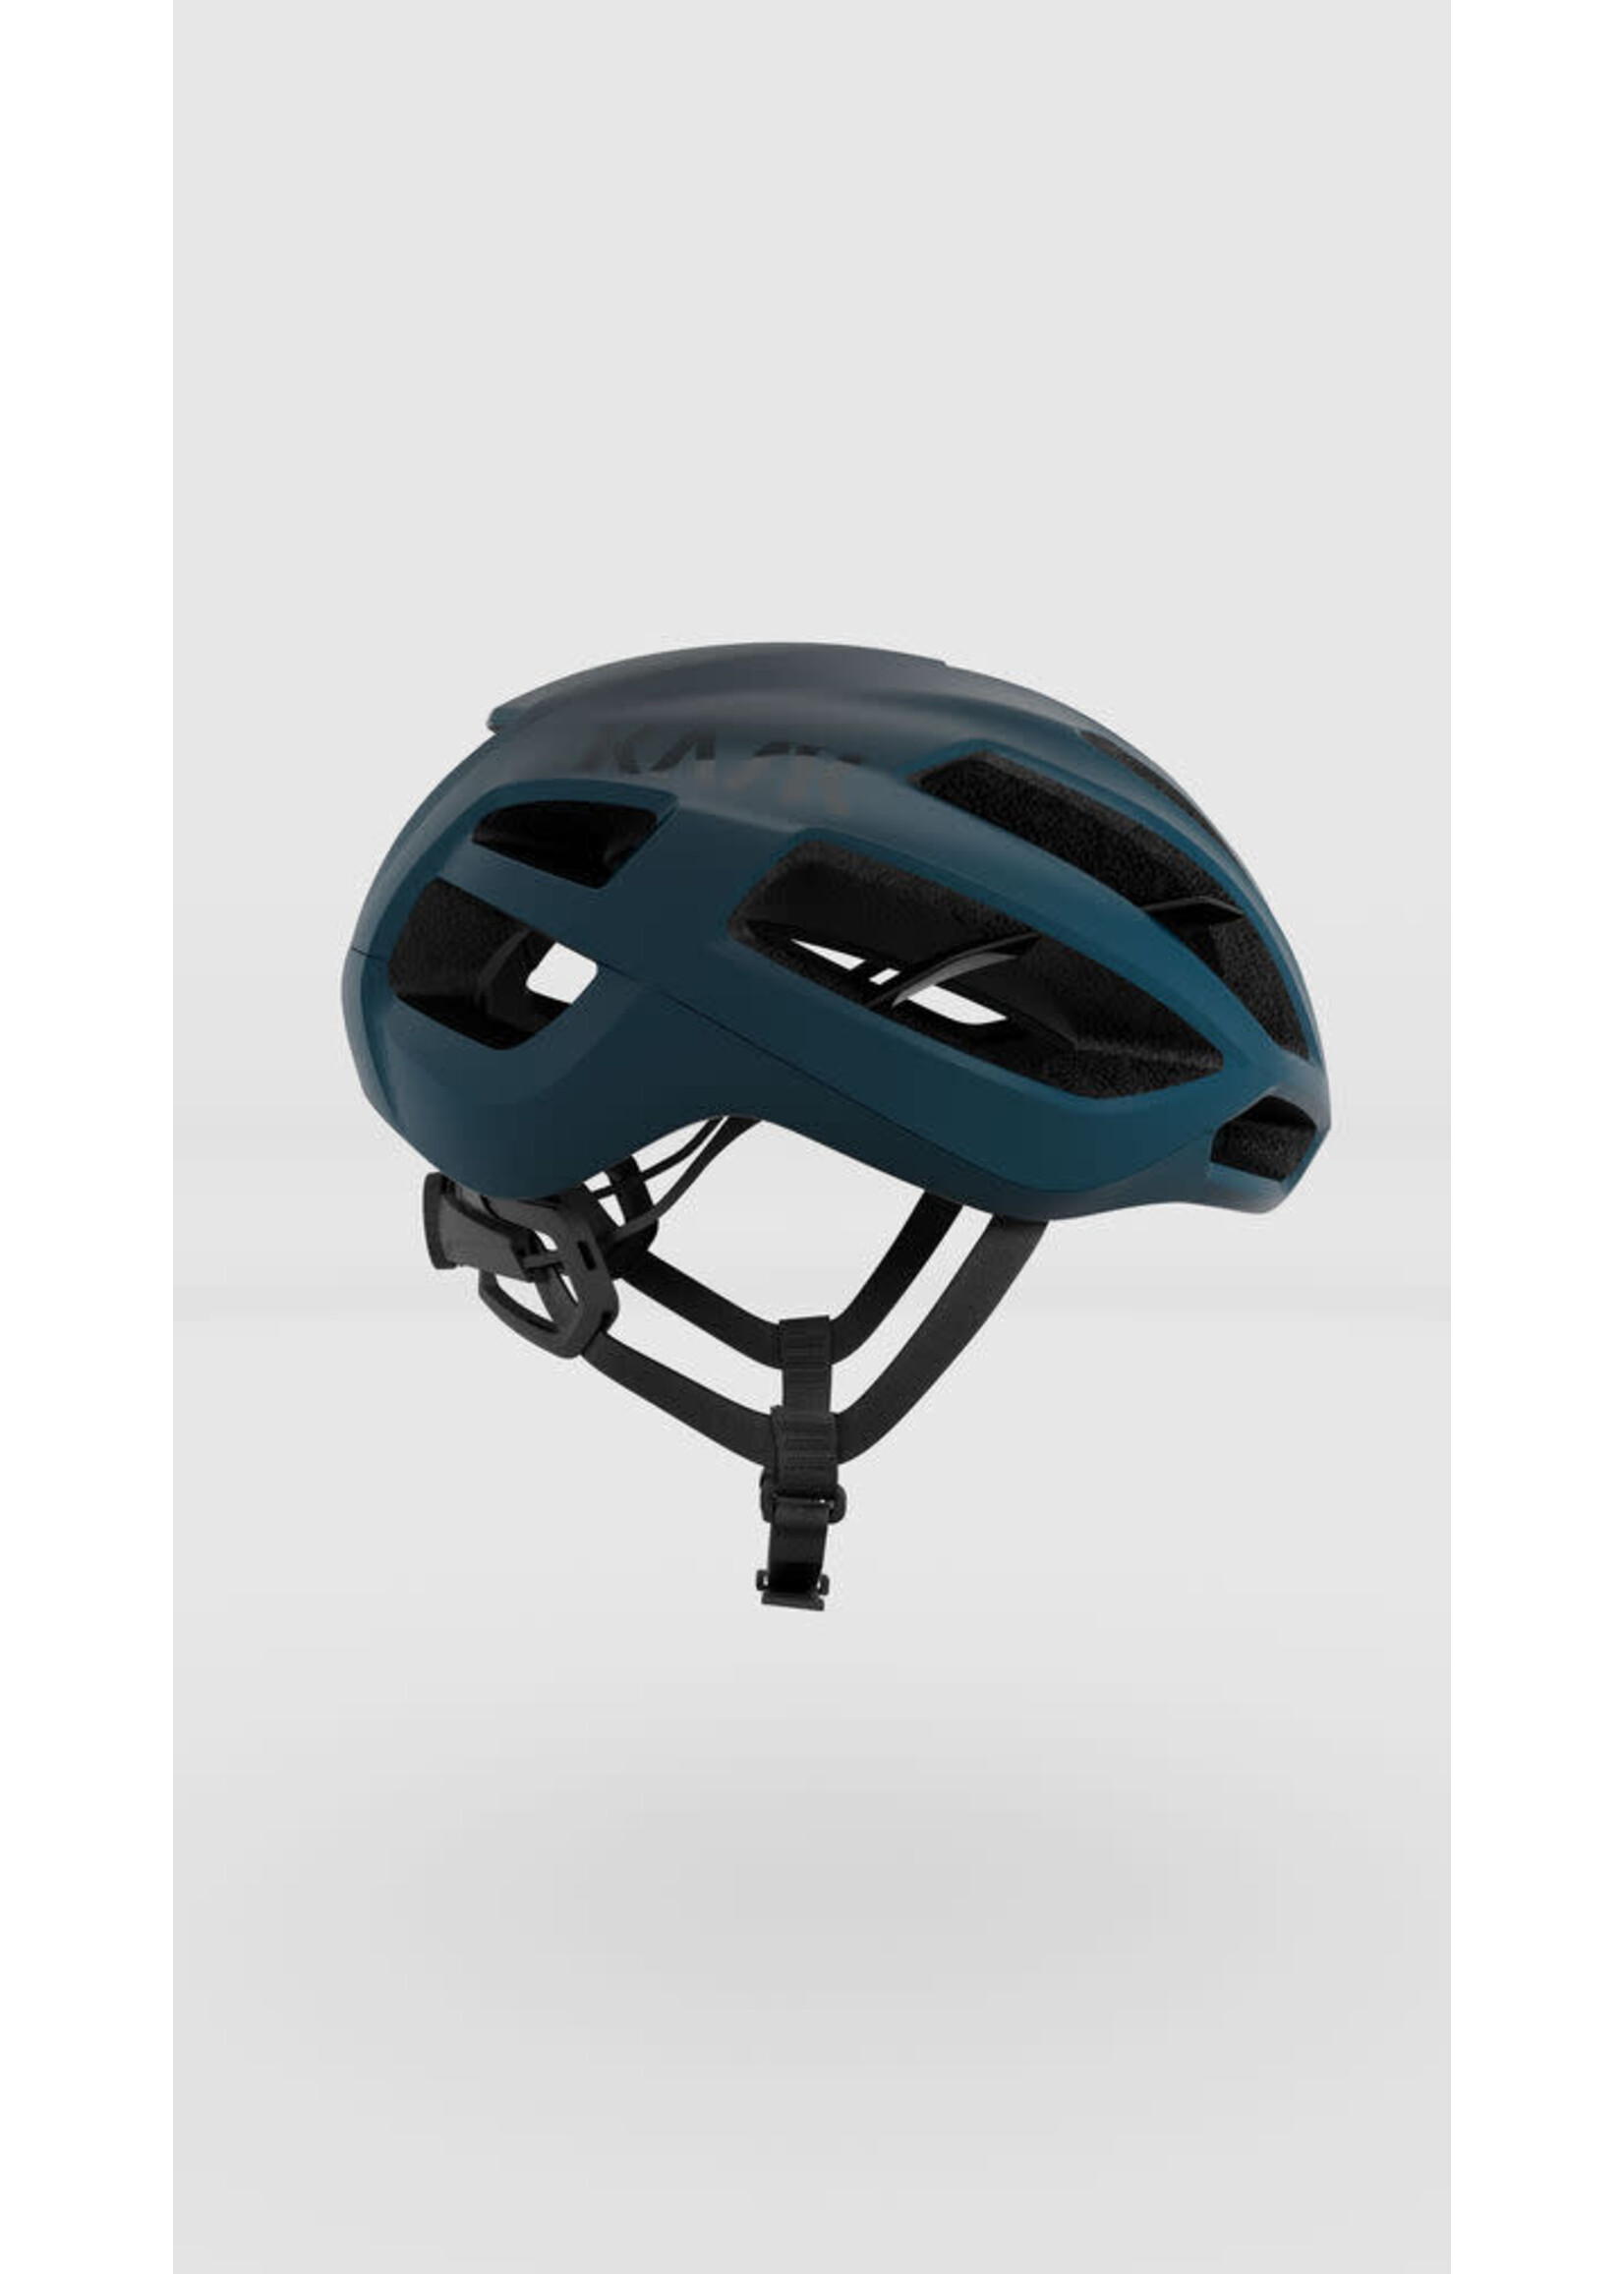 Kask KASK - Casque - Protone Icon - Vert foret